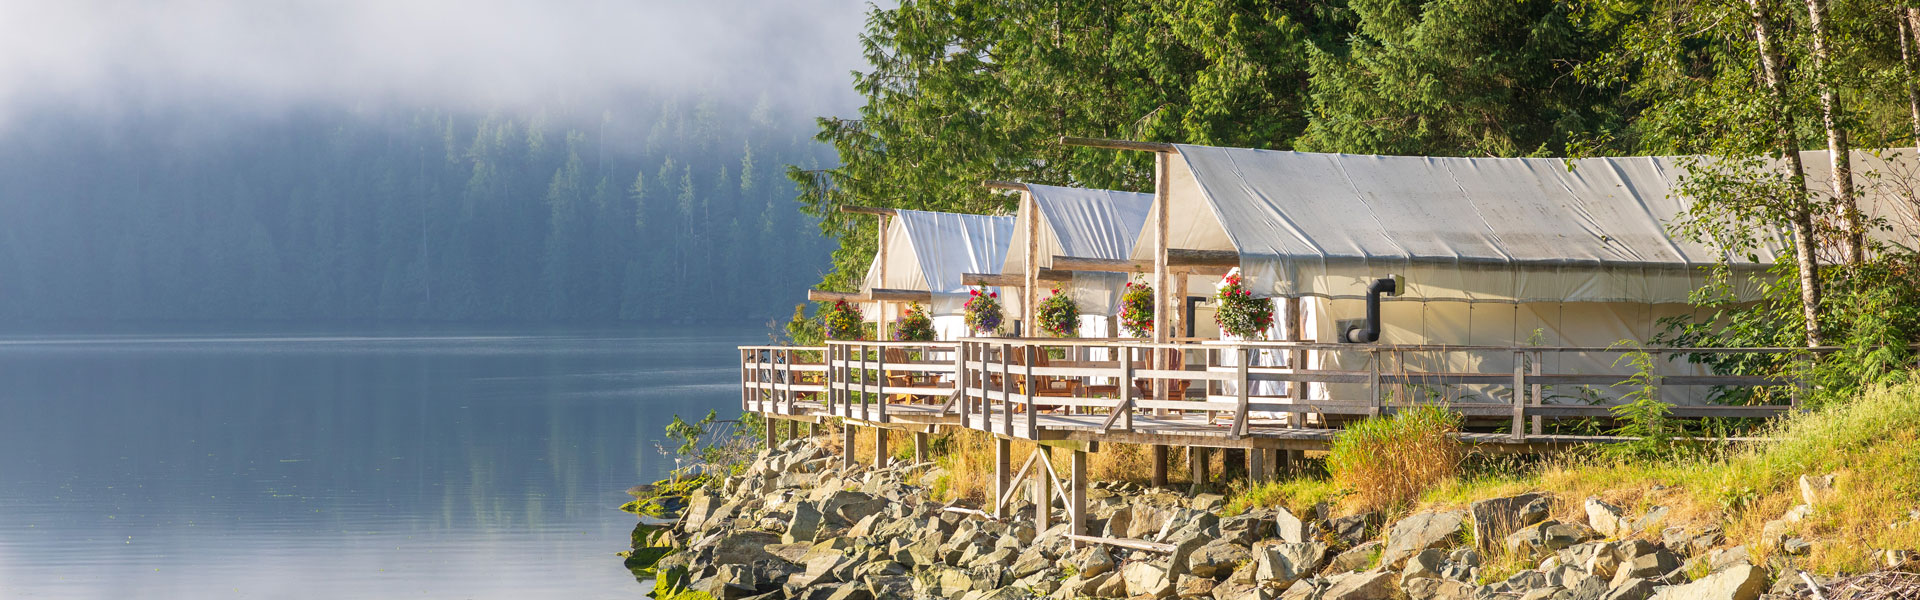 West Coast Canada Train Trips with Luxury Lodges & Hotels